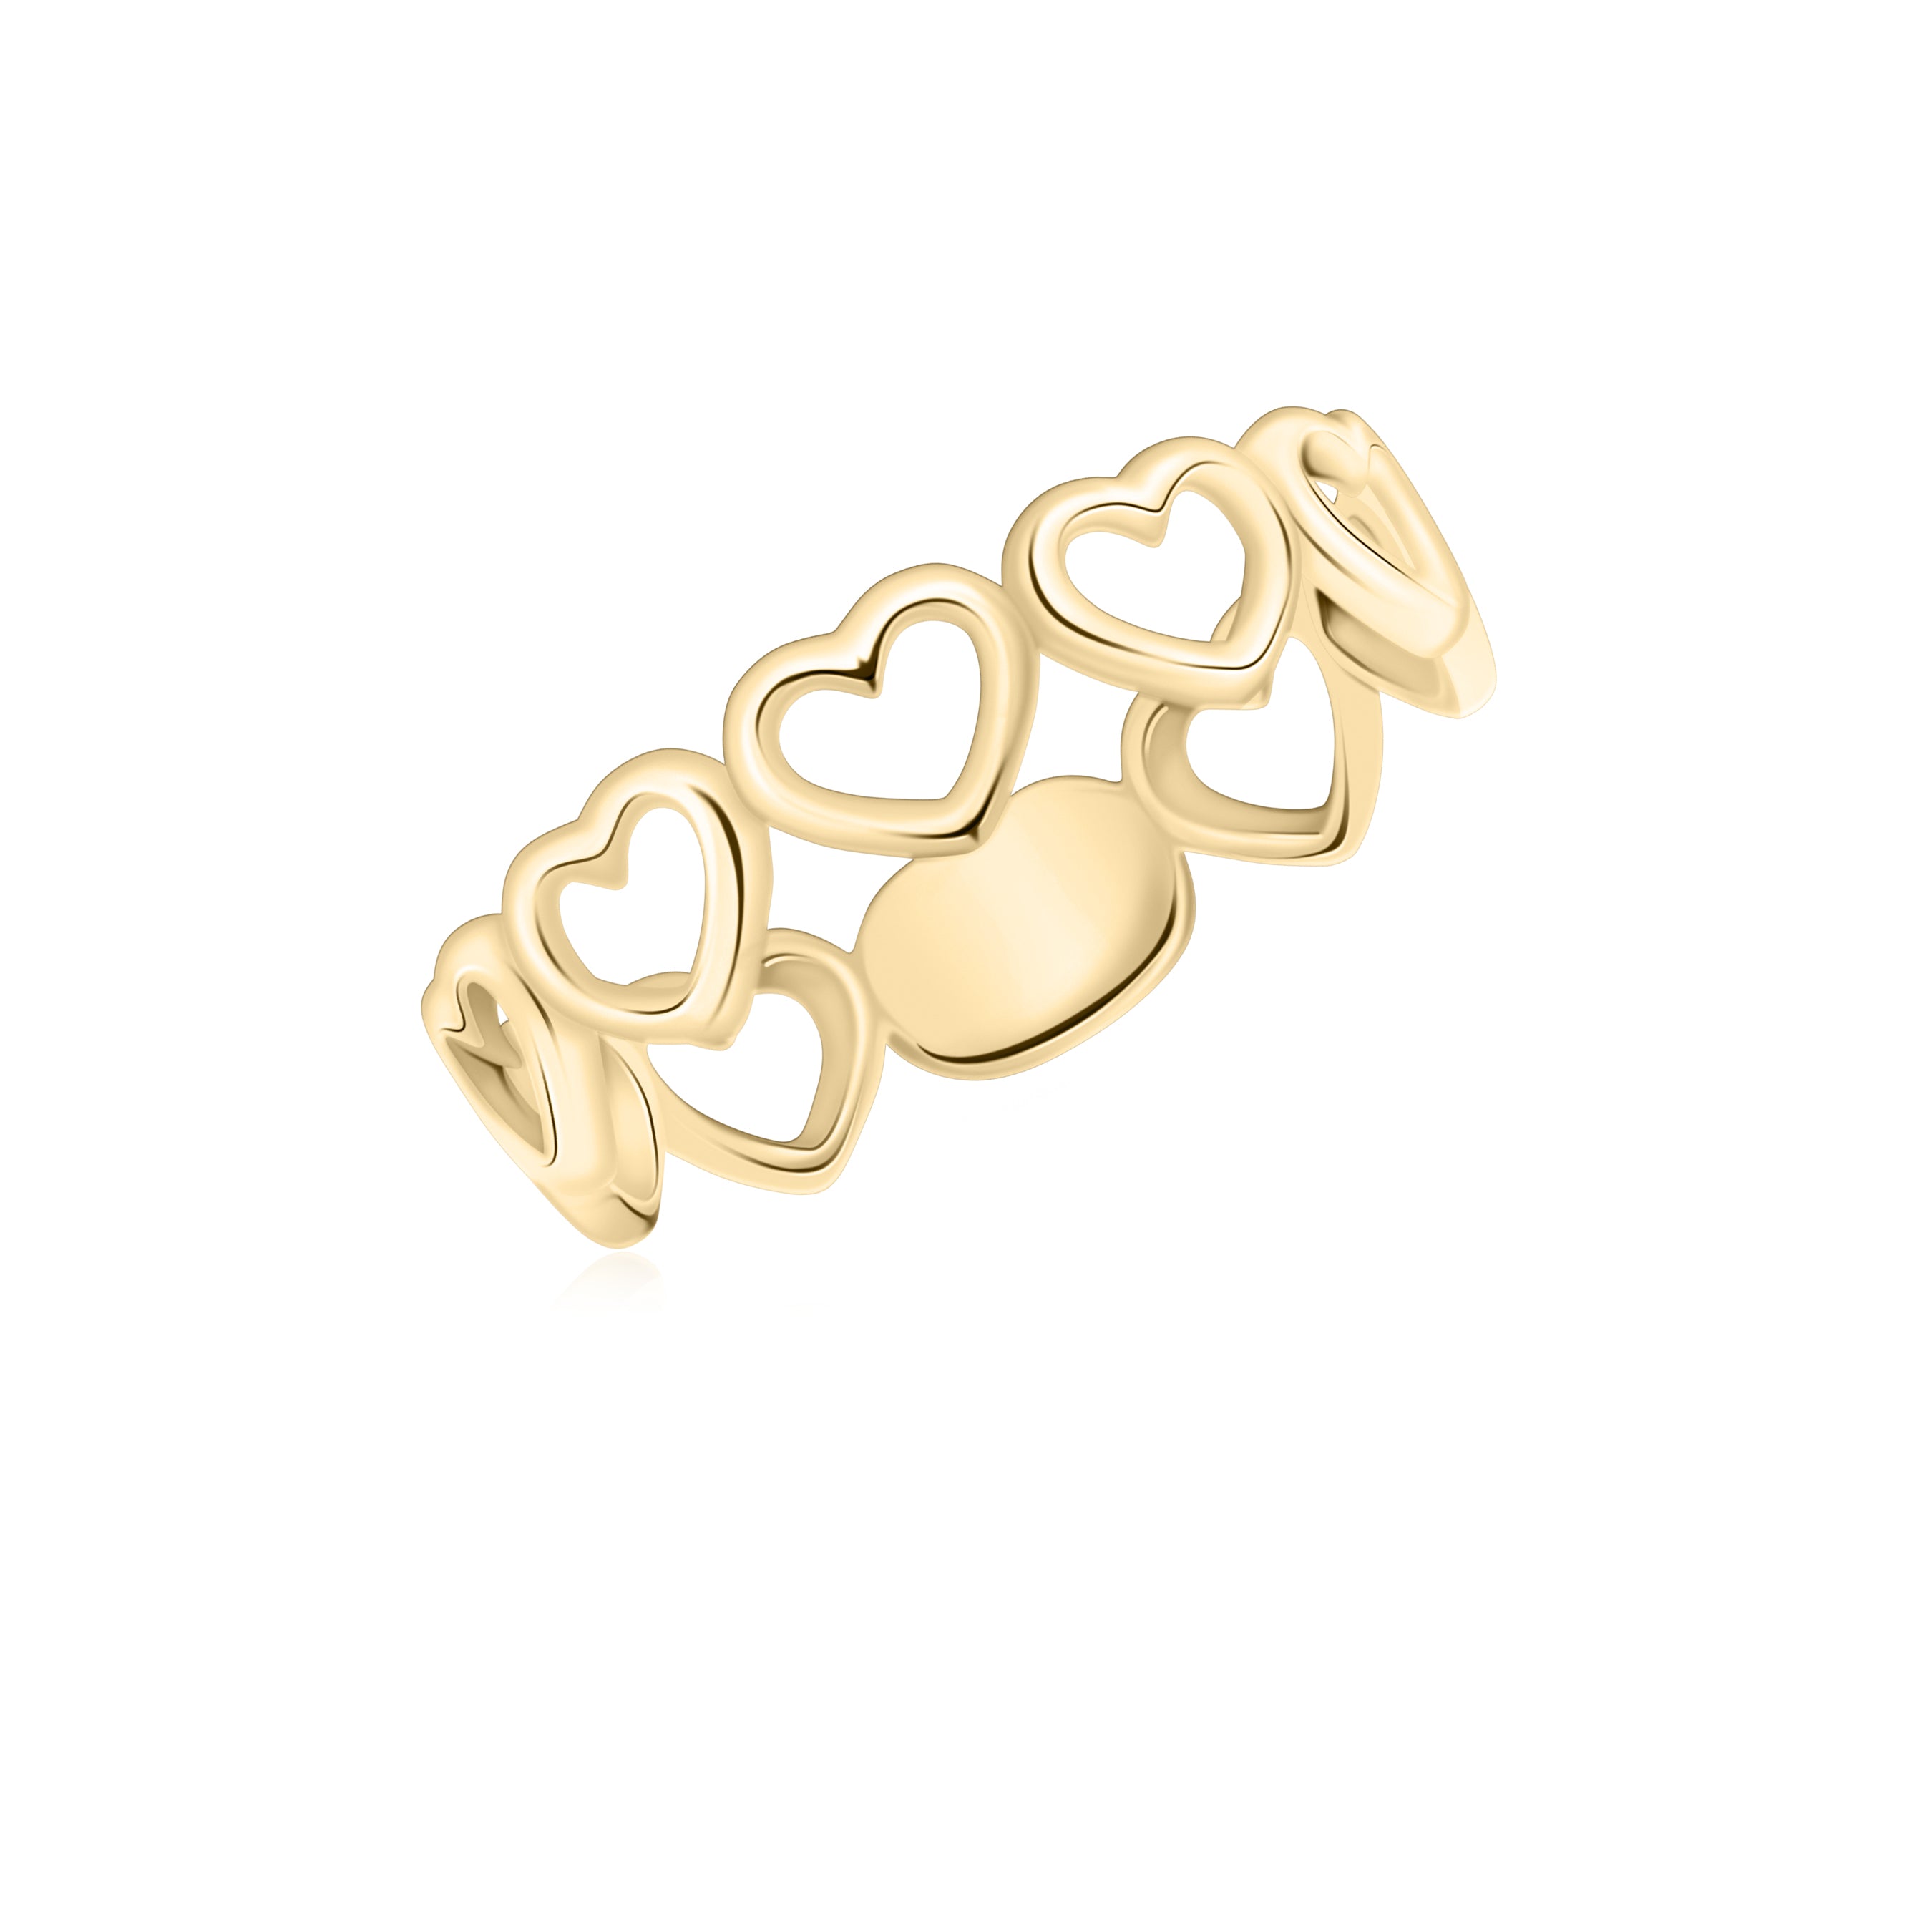 UNICORNJ 14K Yellow Gold Eternity Open Hearts in a Row Ring Italy